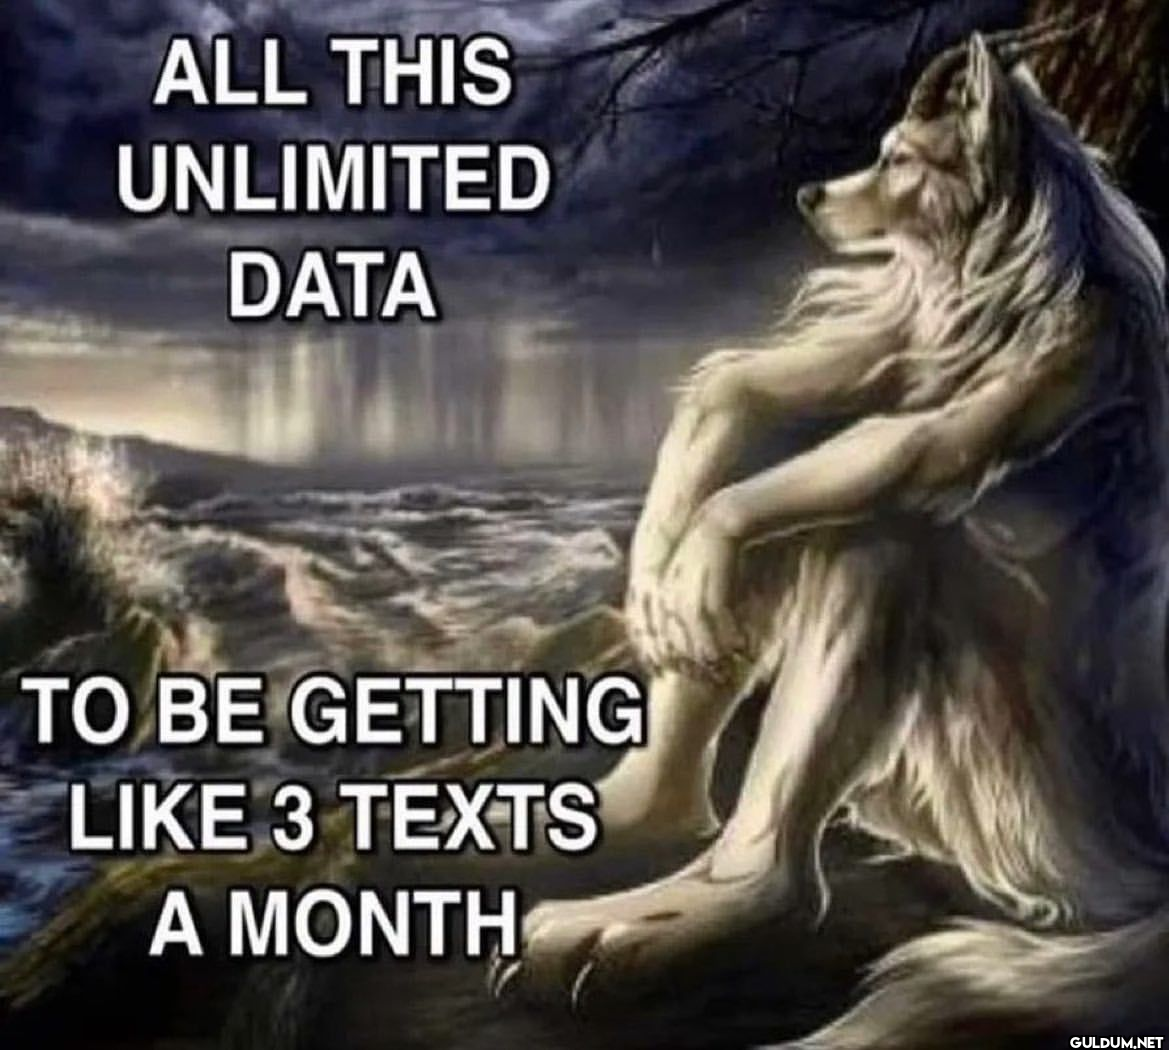 ALL THIS UNLIMITED DATA TO...